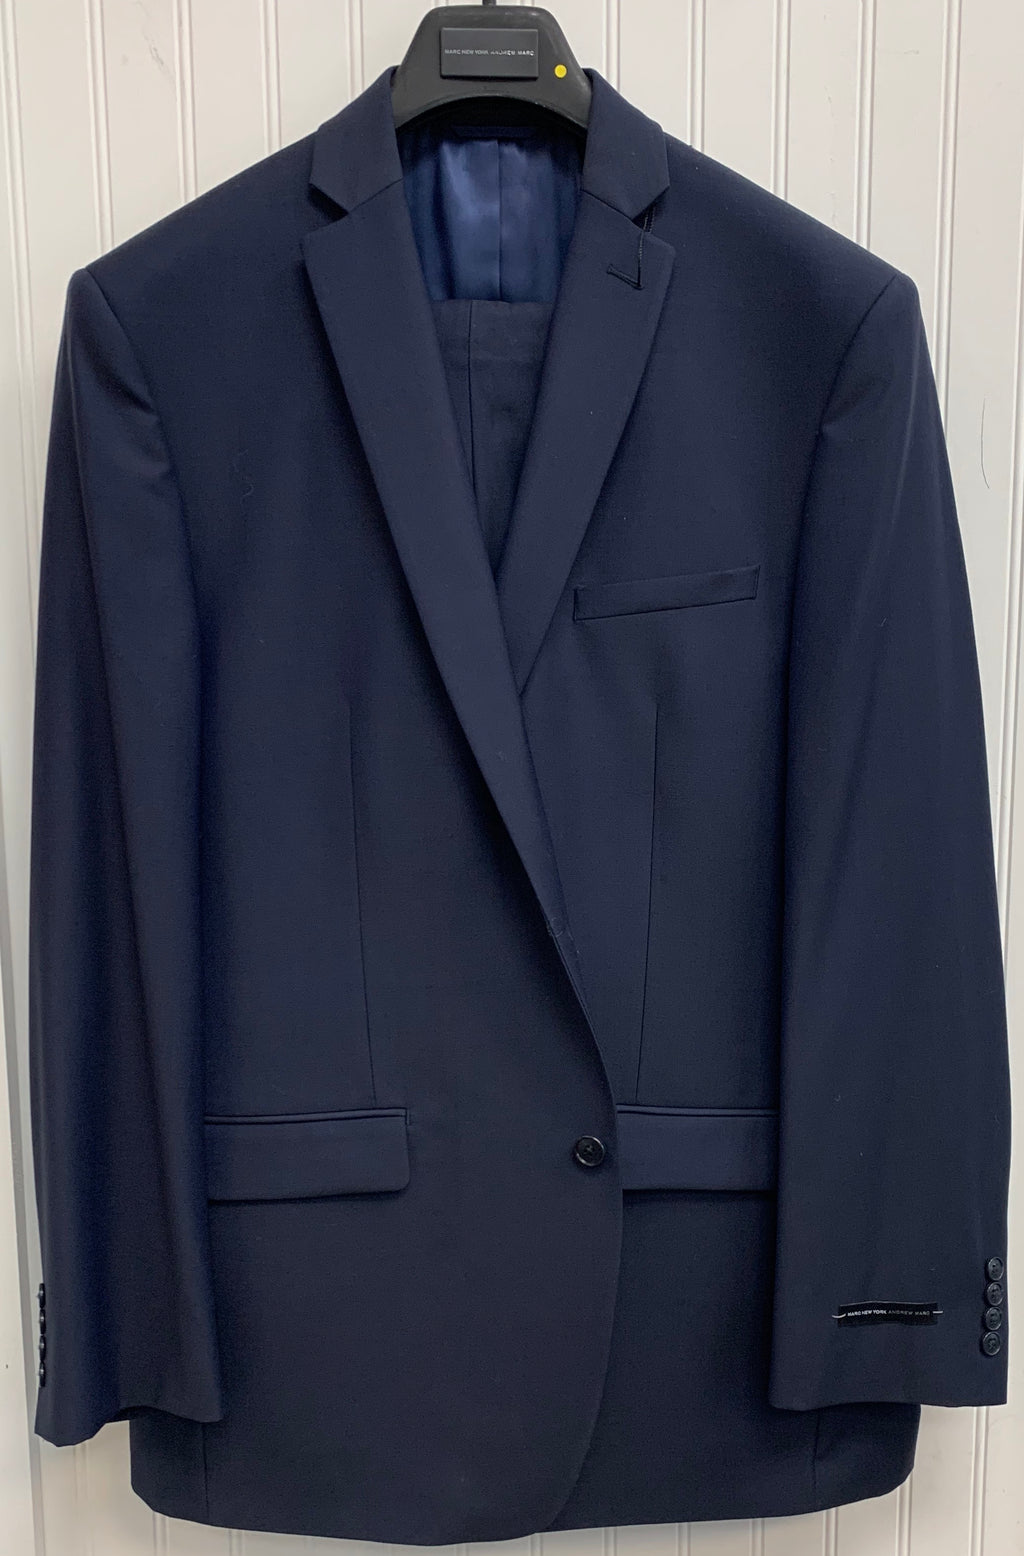 Andrew Marc Wool Suit - CRT02MAY0013 (Solid Navy)